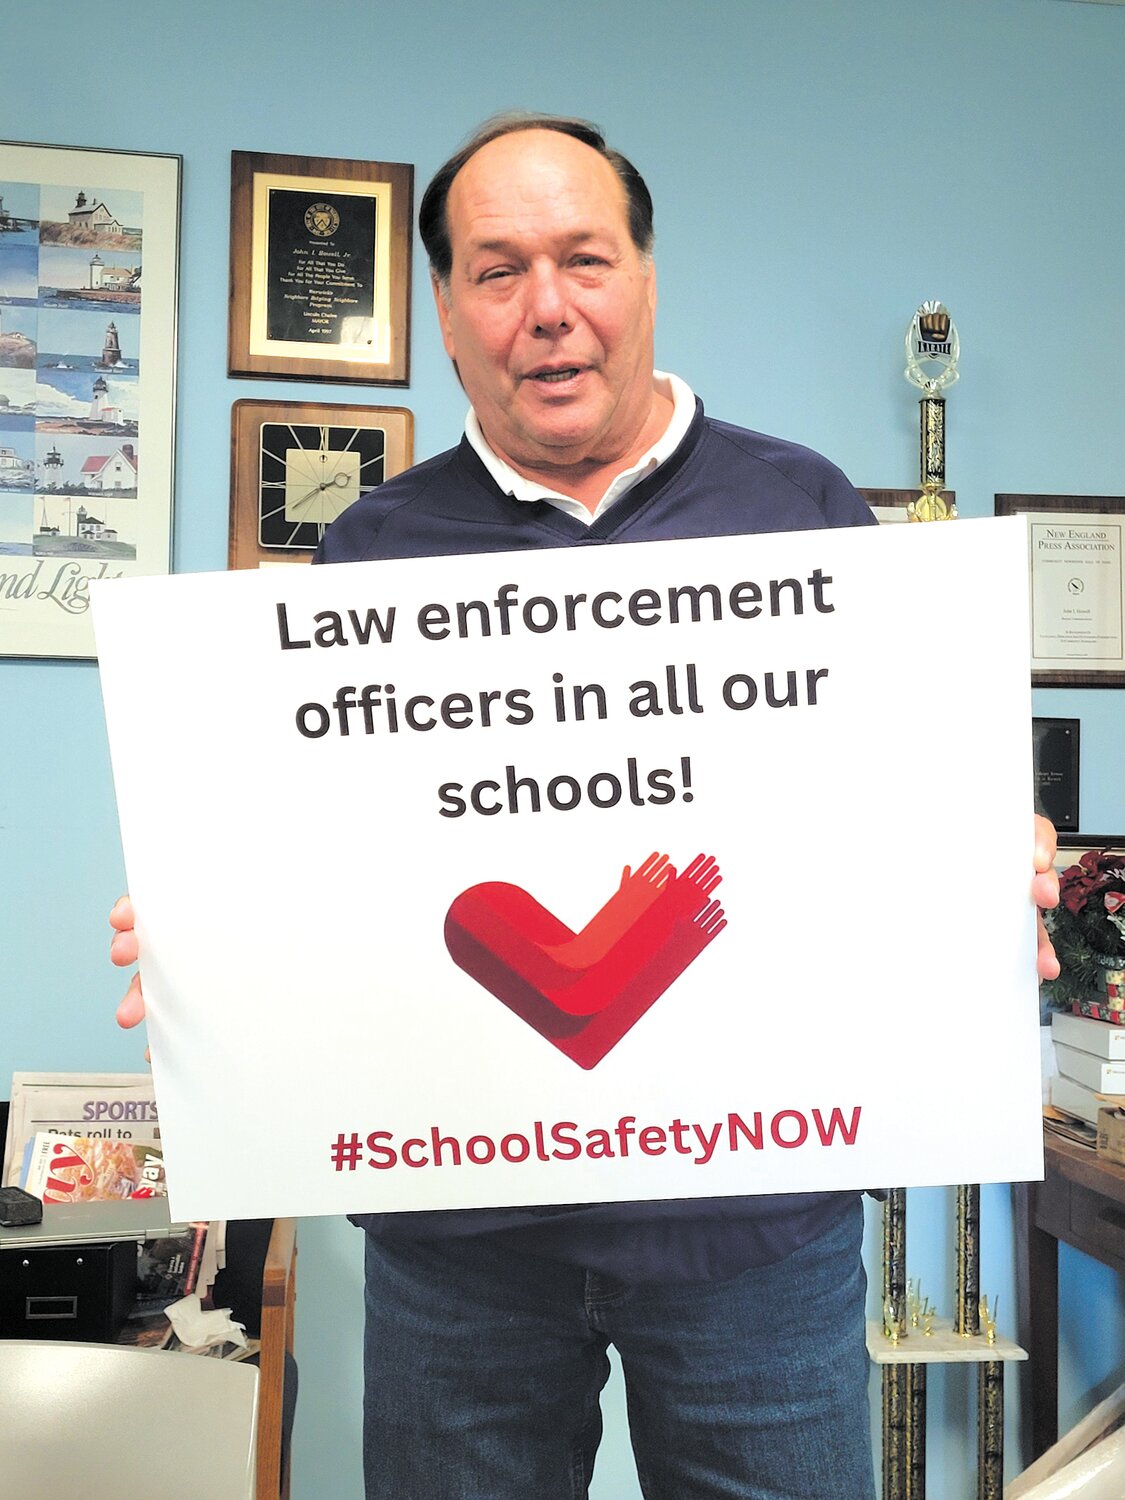 NOT LATER: Grandfather and retired Warwick Police Capt. Tim Colgan has founded School Safety Now, a growing organization that aims to put an armed police officer in every Rhode Island school.